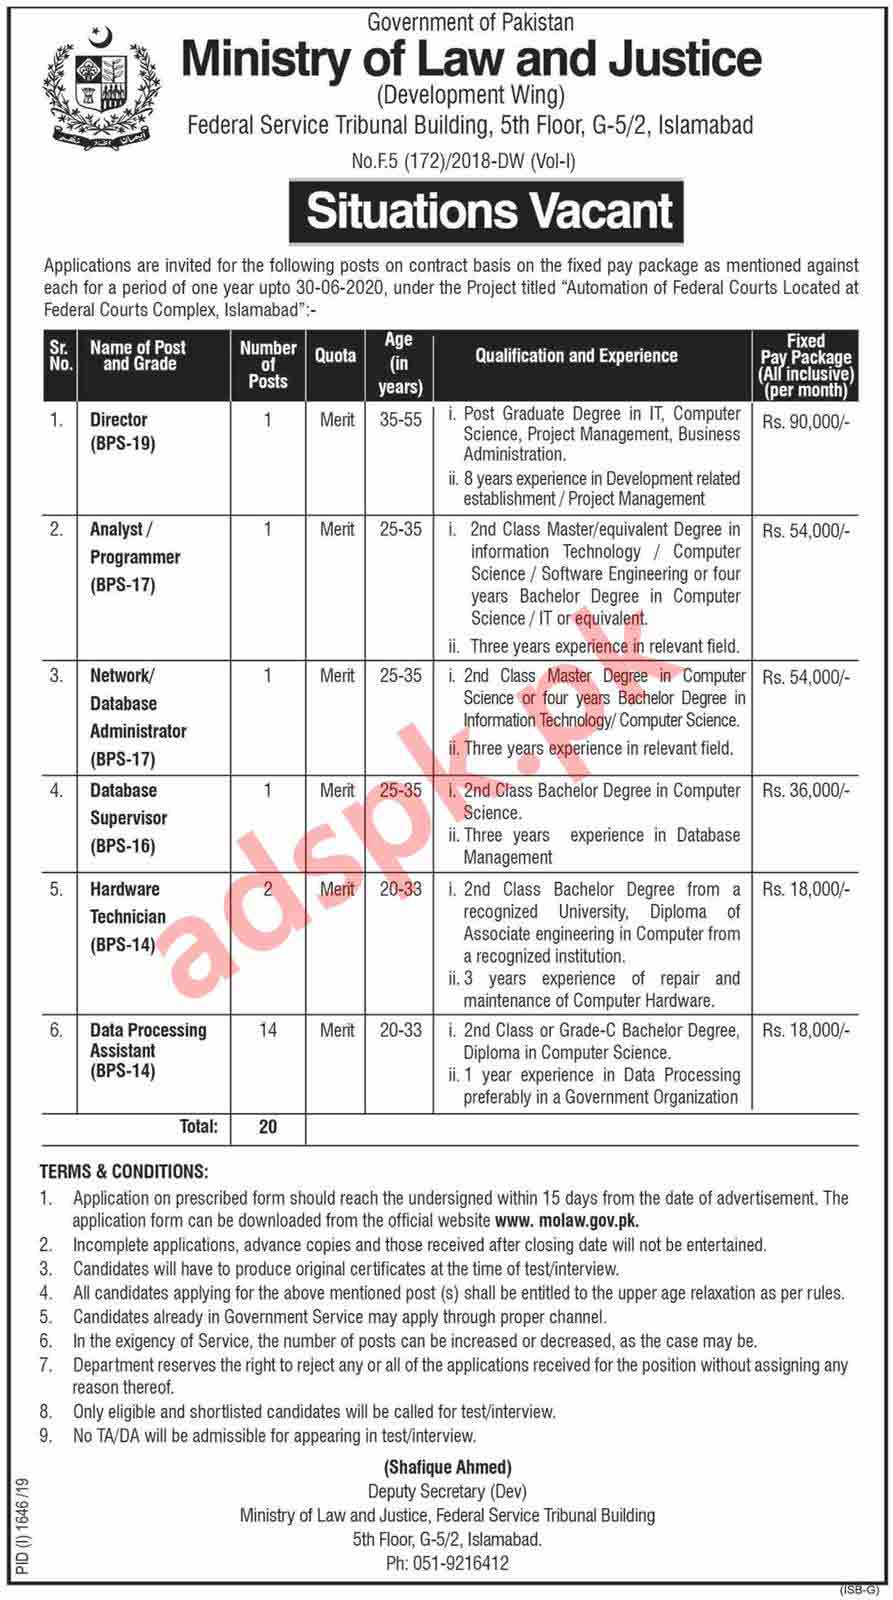 20 Jobs Ministry of Law and Justice (Development Wing) Islamabad Jobs 2019 for Director Analyst Database Admin Supervisor Hardware Technician Data Processing Assistant Jobs Application Form Deadline 15-10-2019 Apply Now